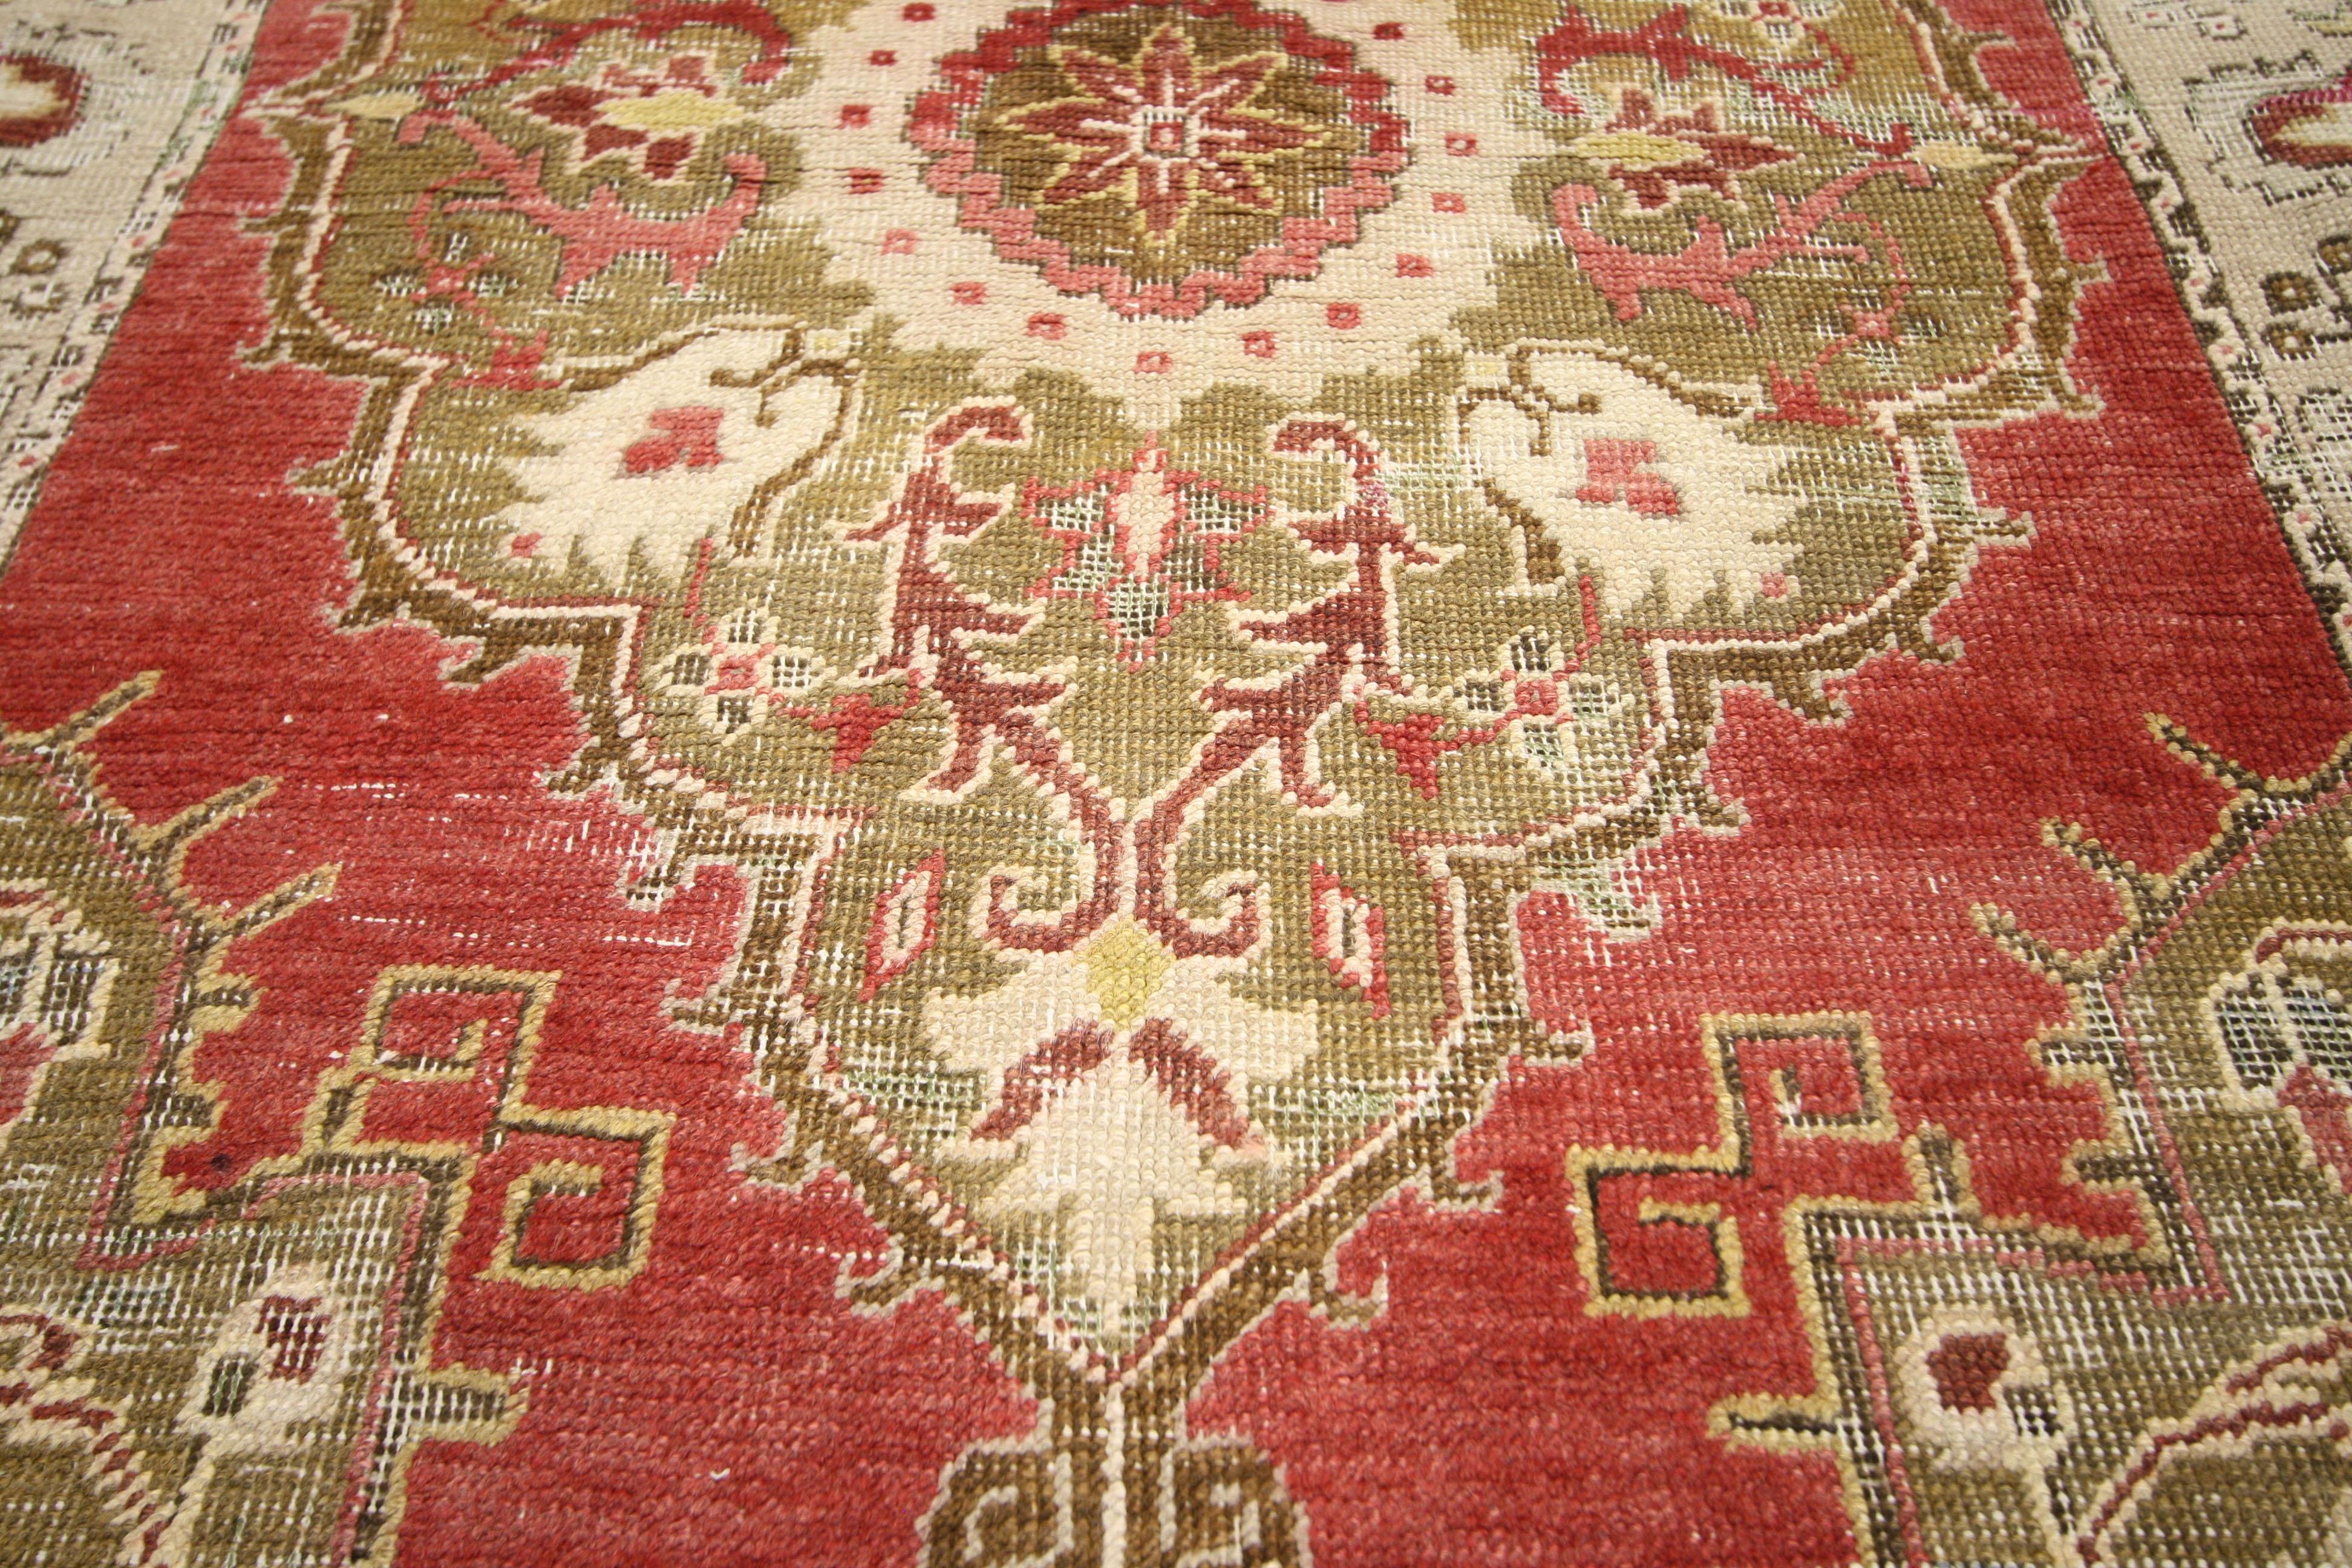 52326, rustic Rococo style distressed vintage Turkish Oushak rug, entry or foyer rug. Whimsy, rustic Rococo style and romance collide in this hand knotted wool distressed vintage Turkish Oushak rug. A ravishing French style medallion is an